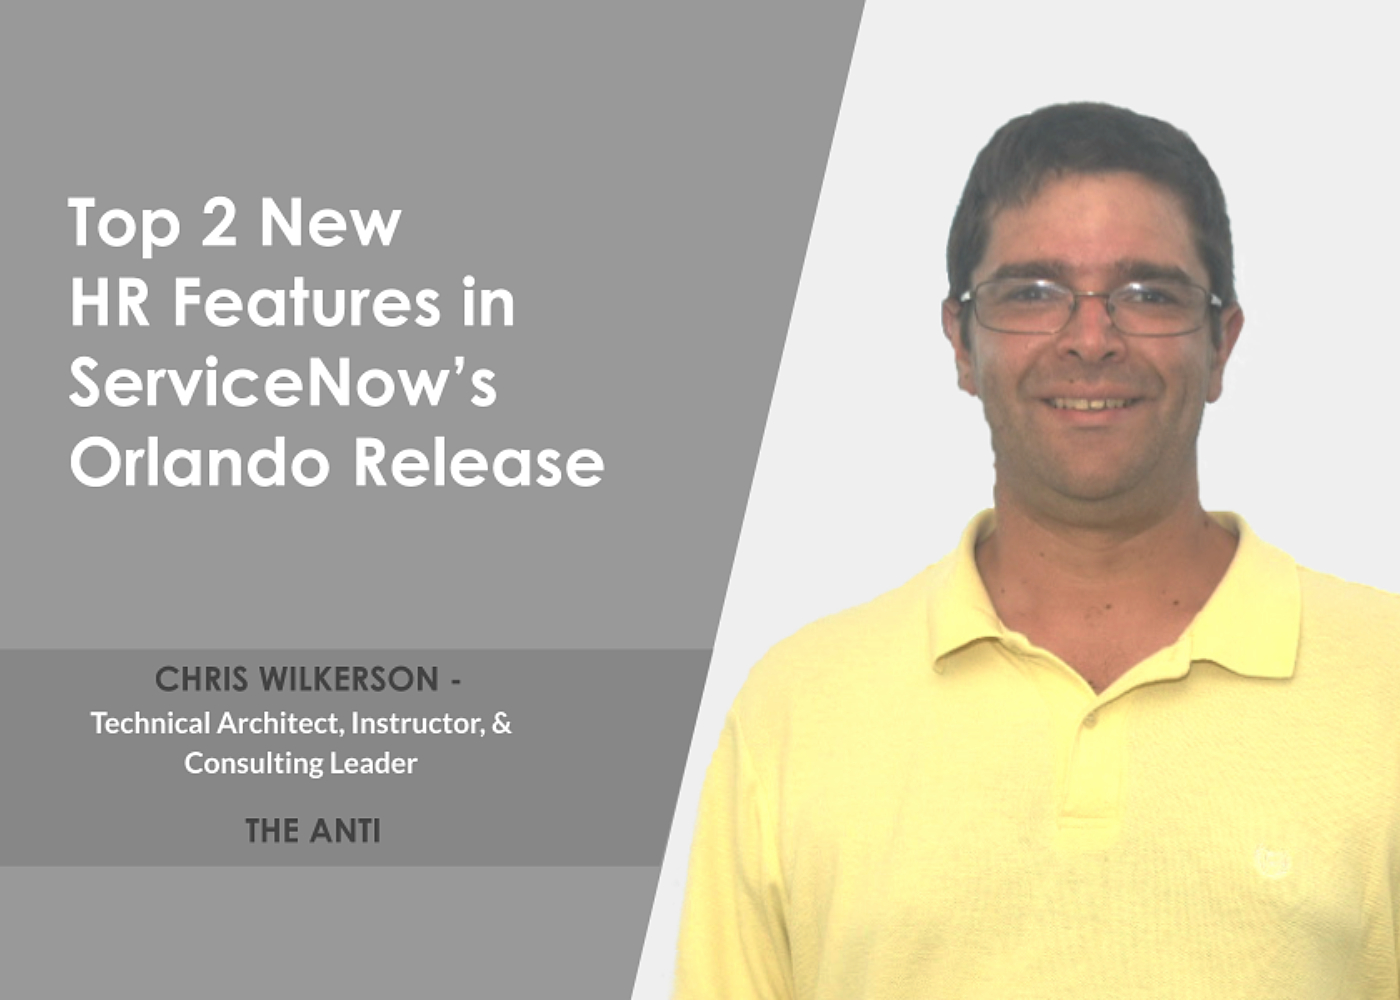 Top 2 New HR Service Delivery Features in ServiceNow’s Orlando Release